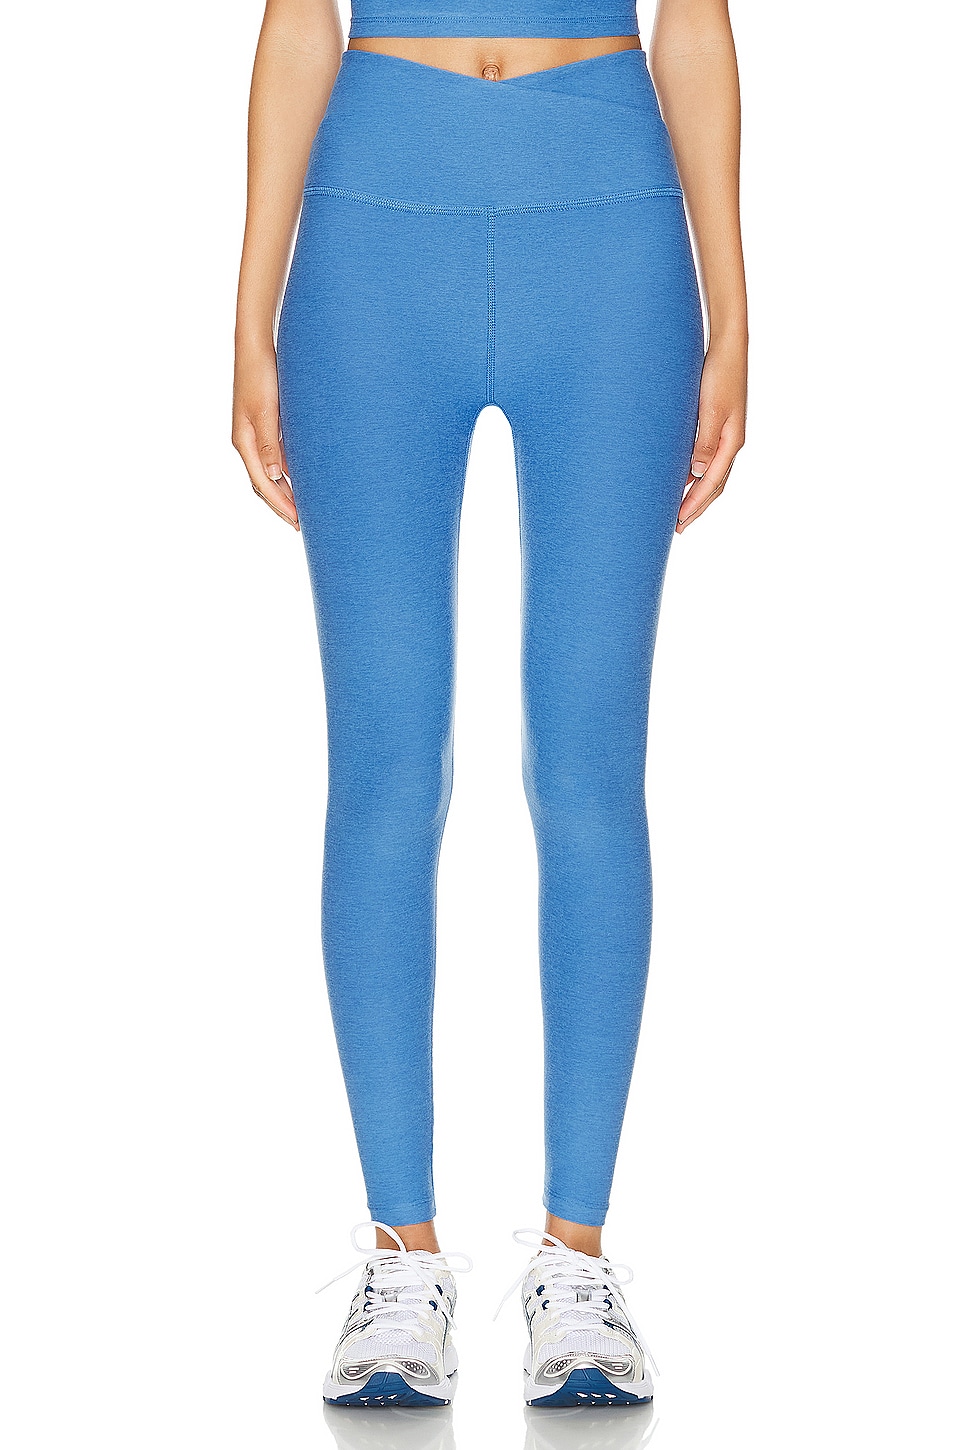 Spacedye At Your Leisure High Waisted Midi Legging in Blue